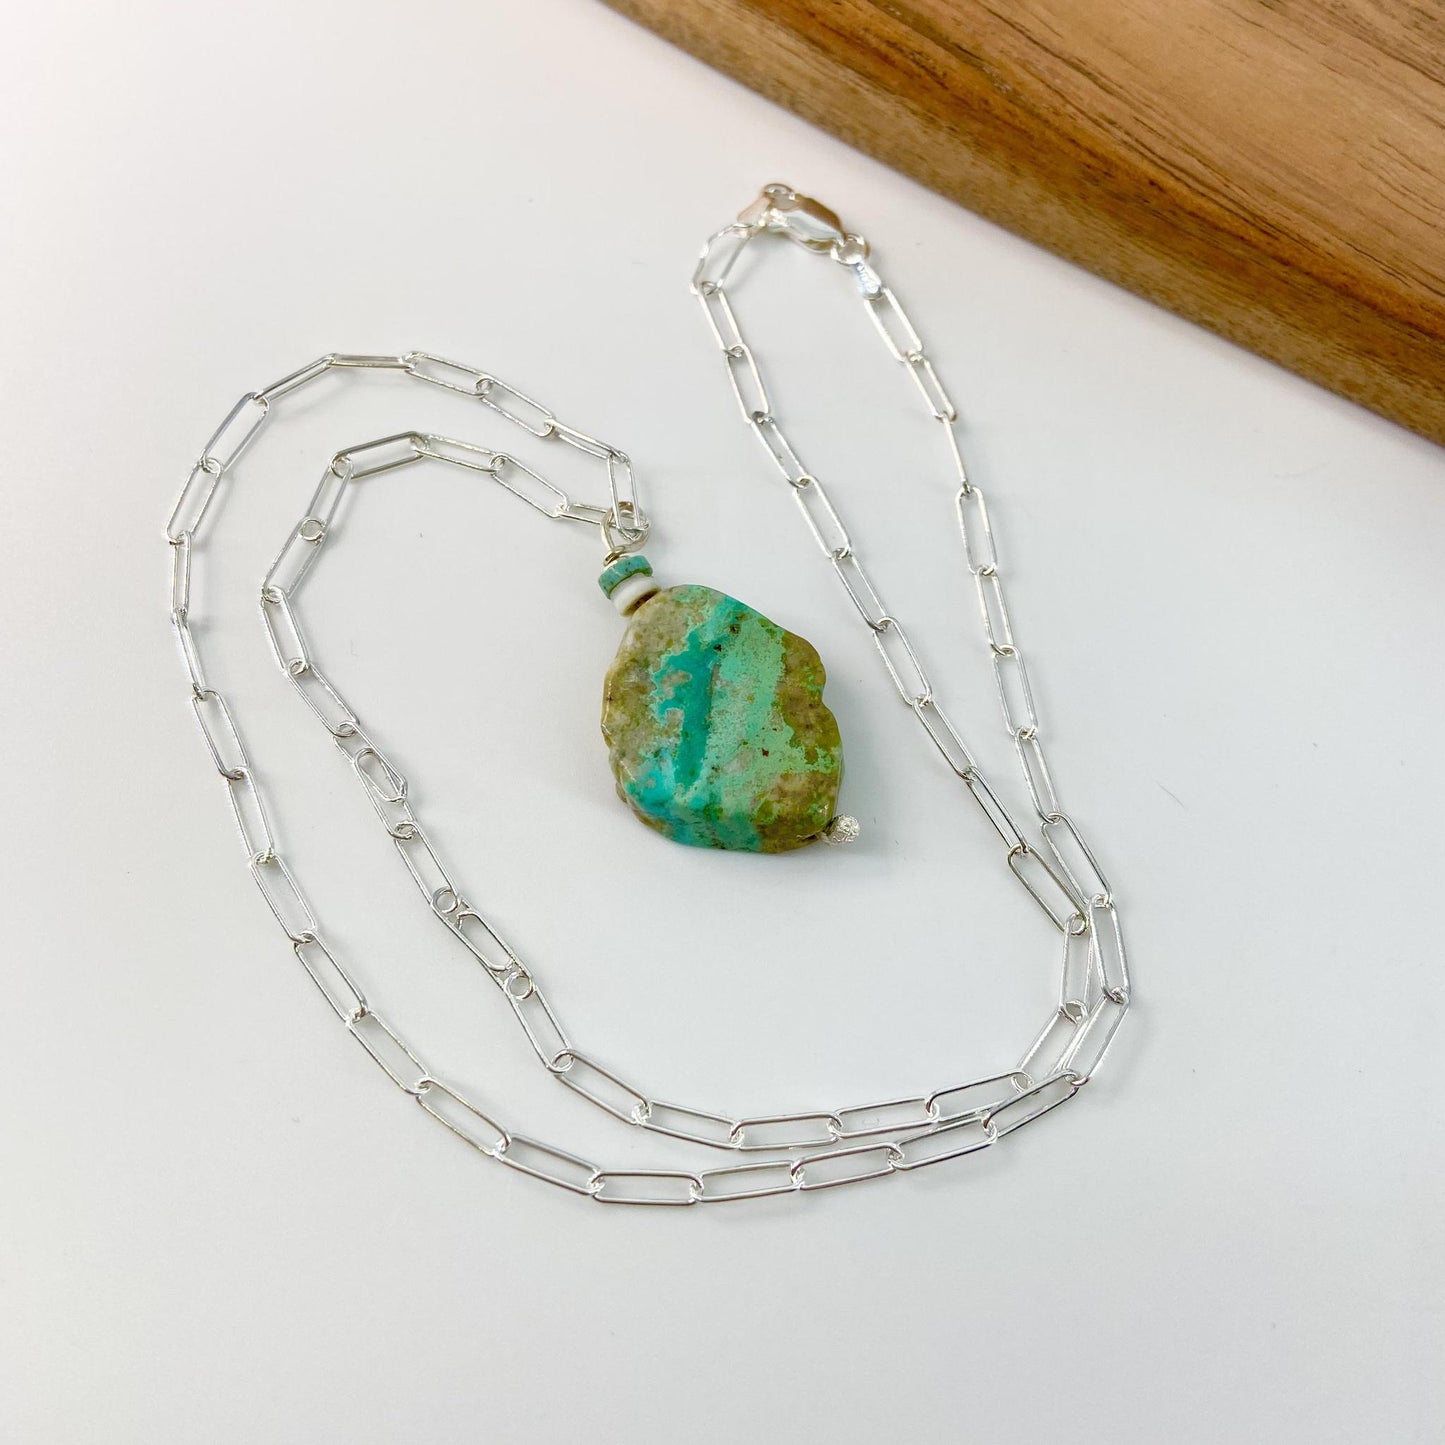 Necklace - Turquoise Slice/Sterling Chain